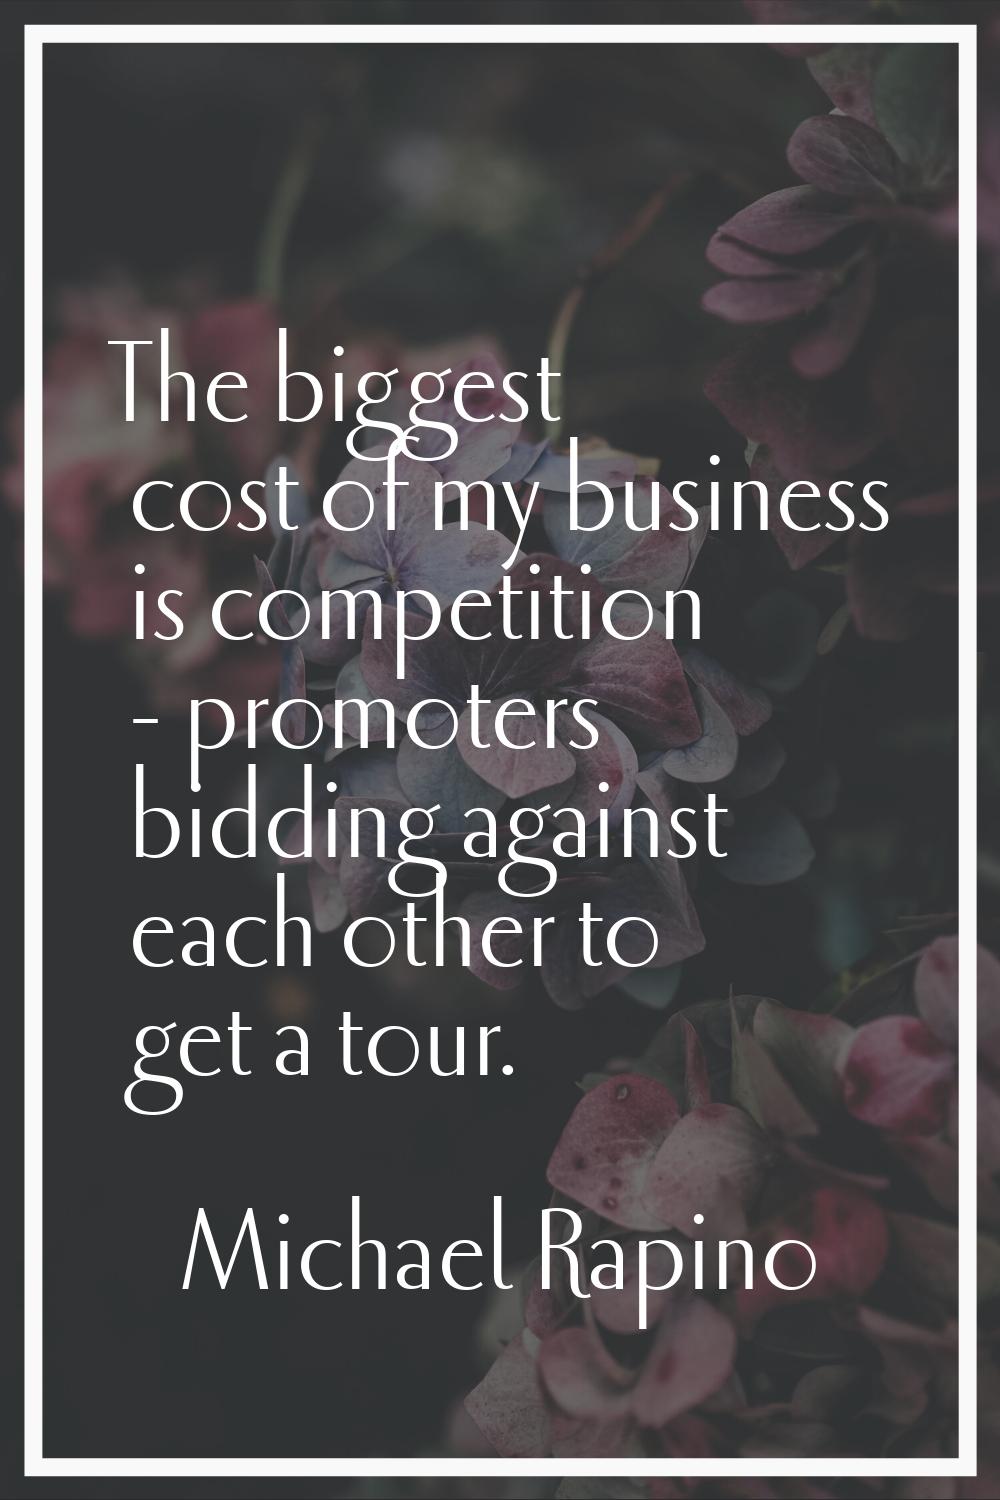 The biggest cost of my business is competition - promoters bidding against each other to get a tour